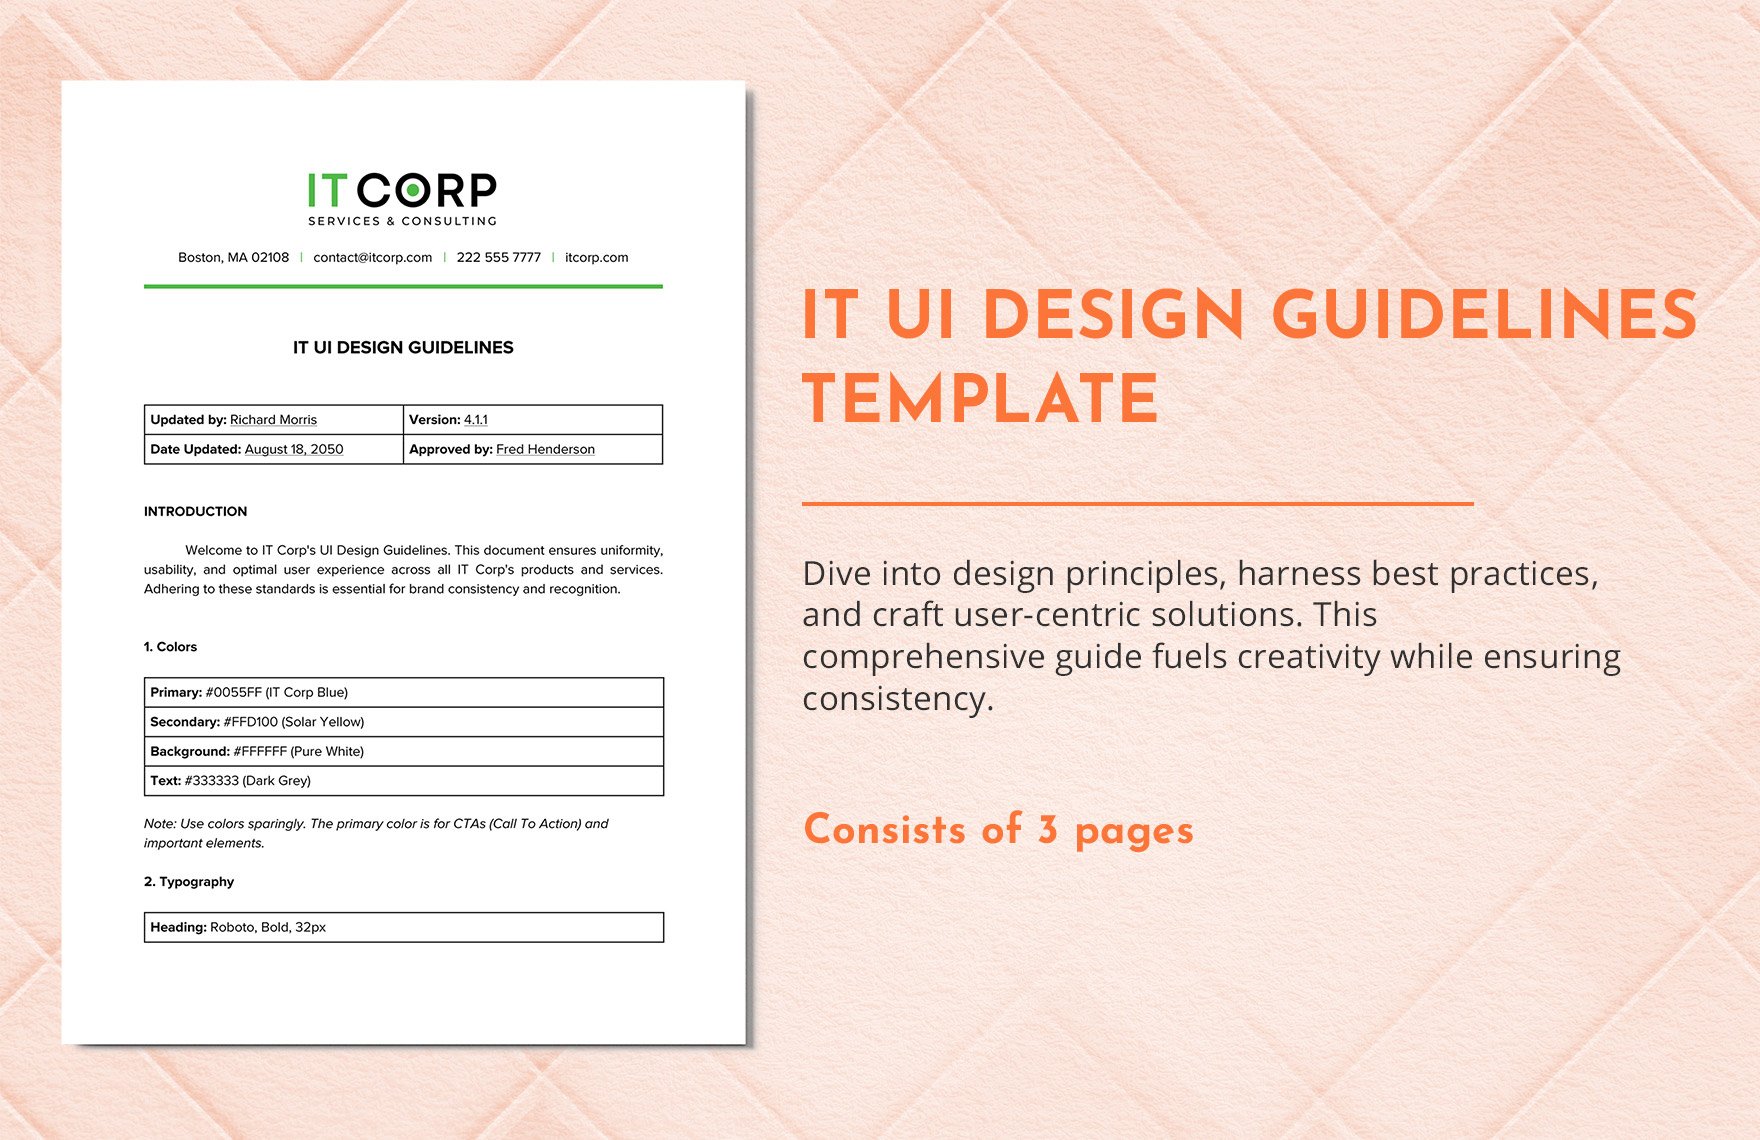 IT UI Design Guidelines Template in Word, Google Docs, PDF